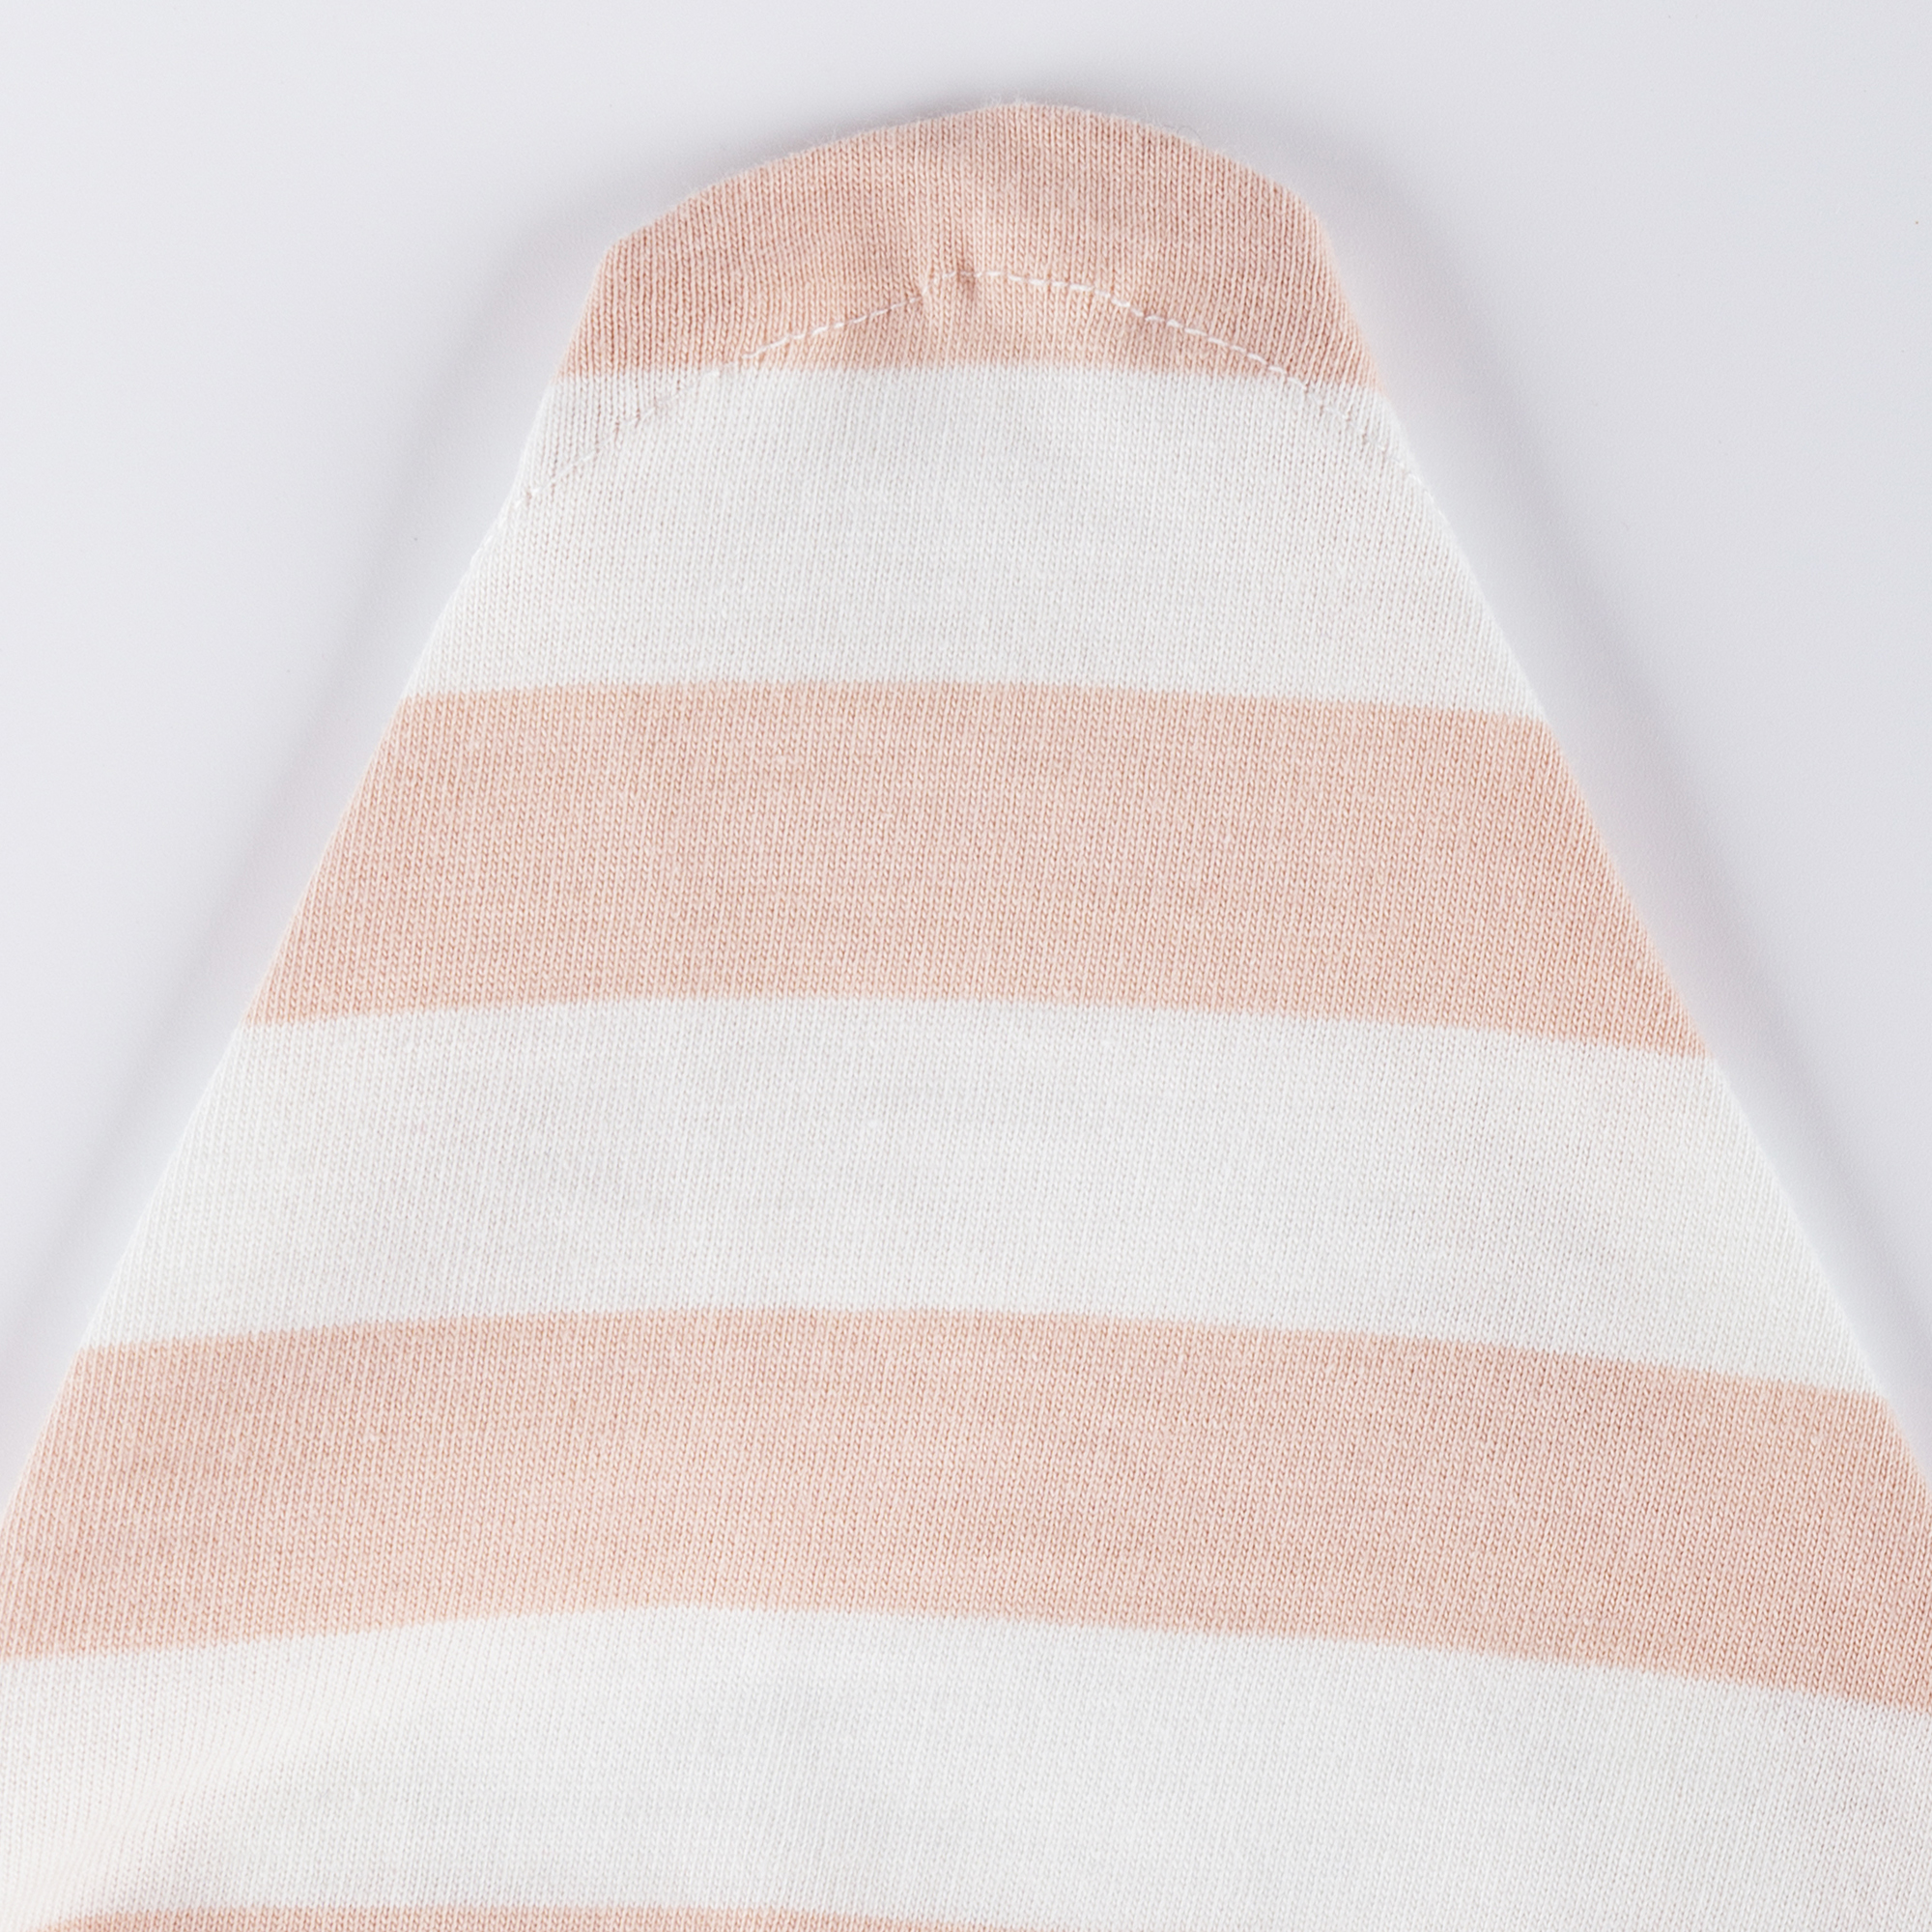 Baby summer headscarf hat, pale pink